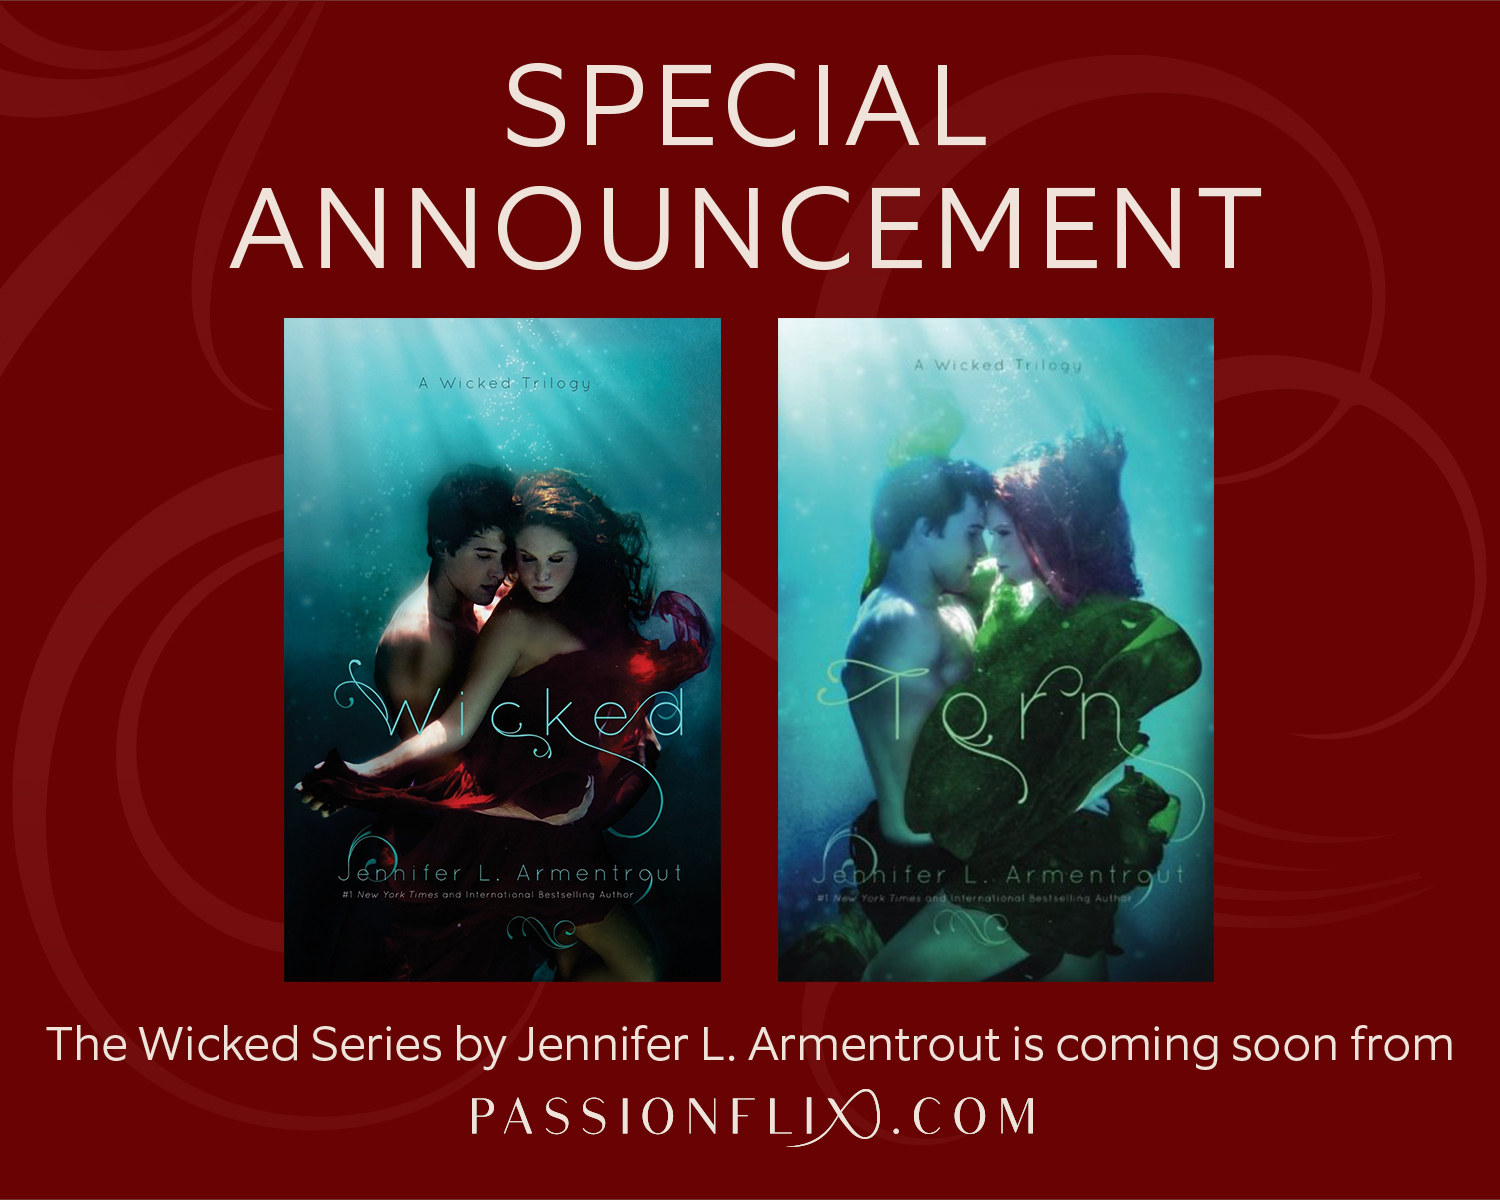 Special Annoucment_WICKED SERIES_static graphic_red rose.jpg